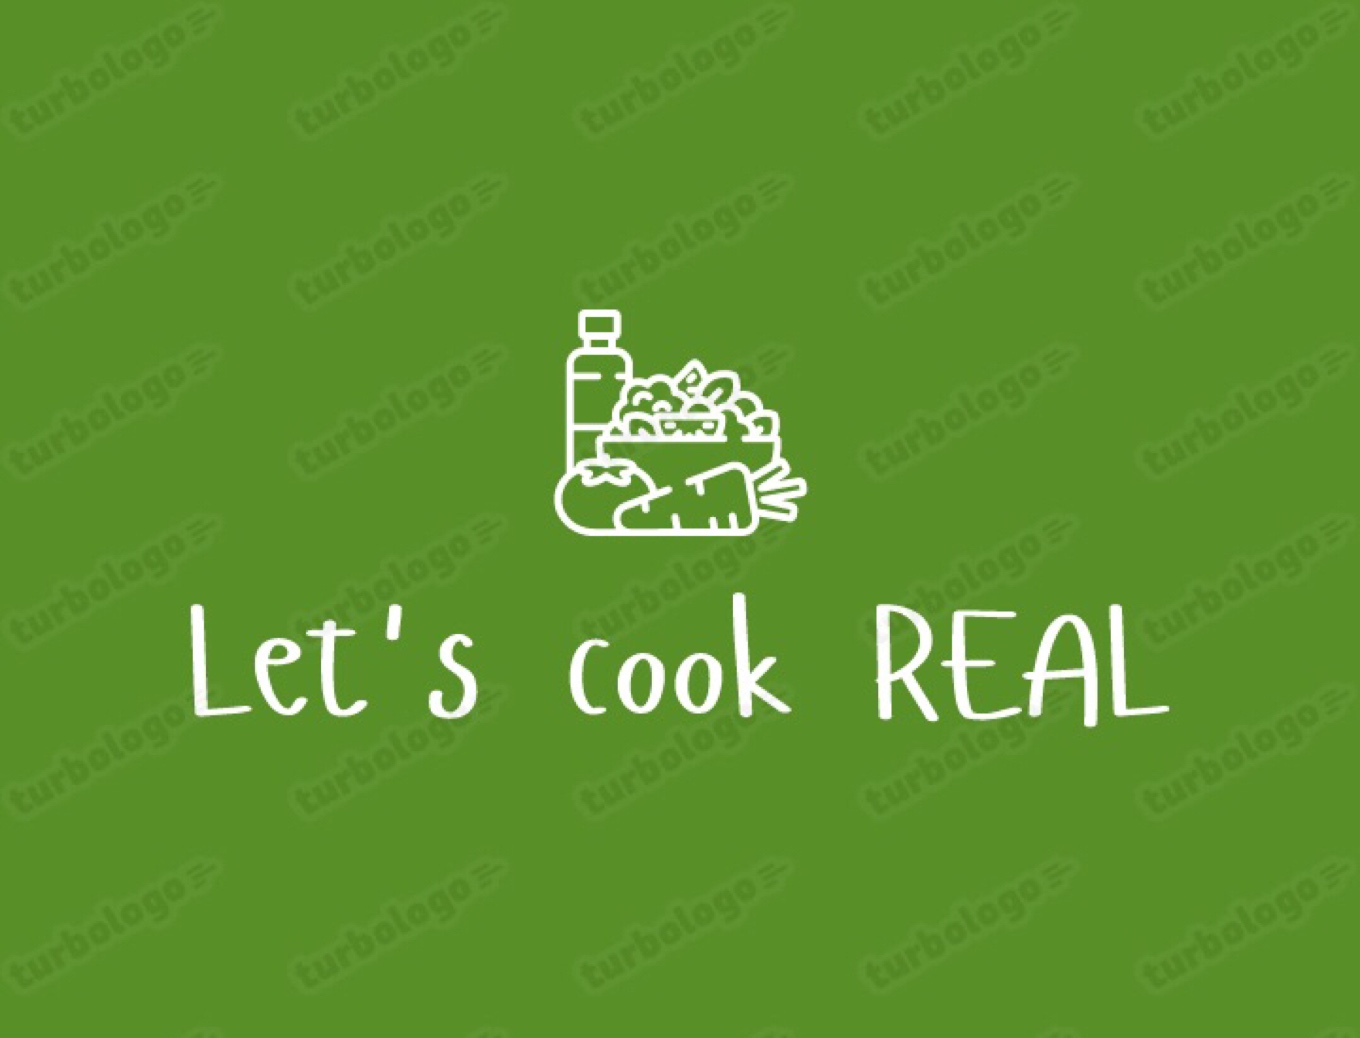 Lets_cook_real